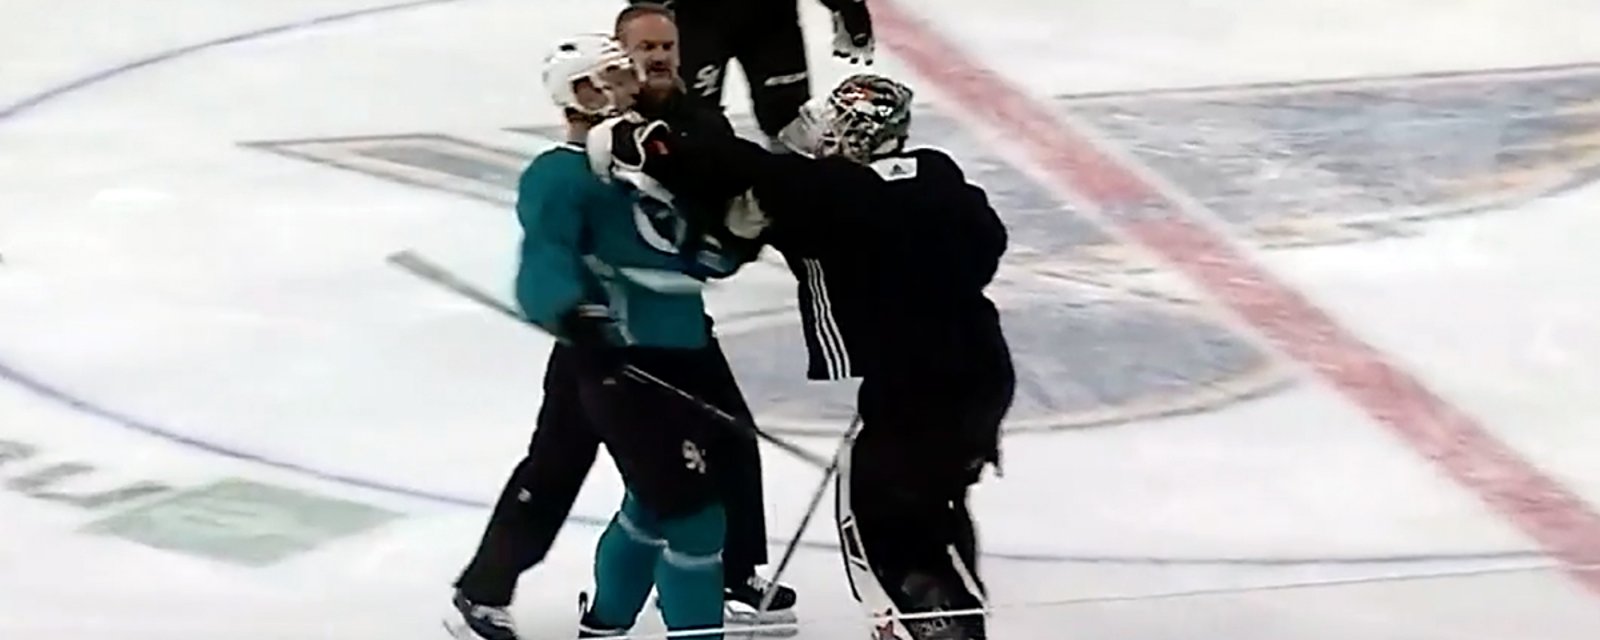 Report: Fight breaks out at Sharks practice ahead of Game 6 